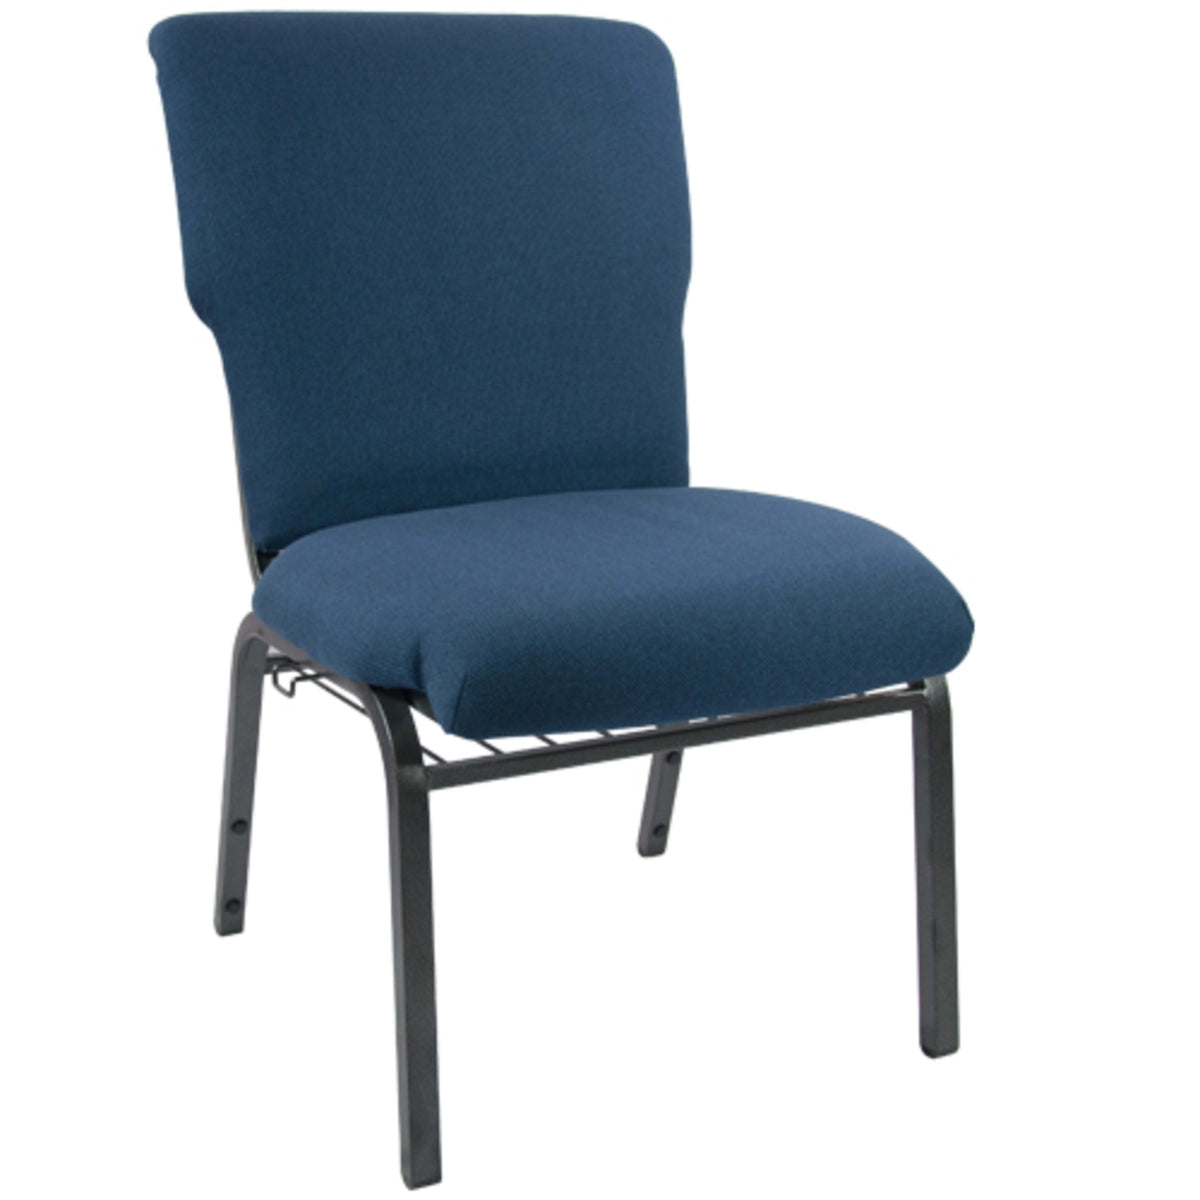 Navy Fabric/Silver Vein Frame |#| Navy Discount Church Chair - 21 in. Wide